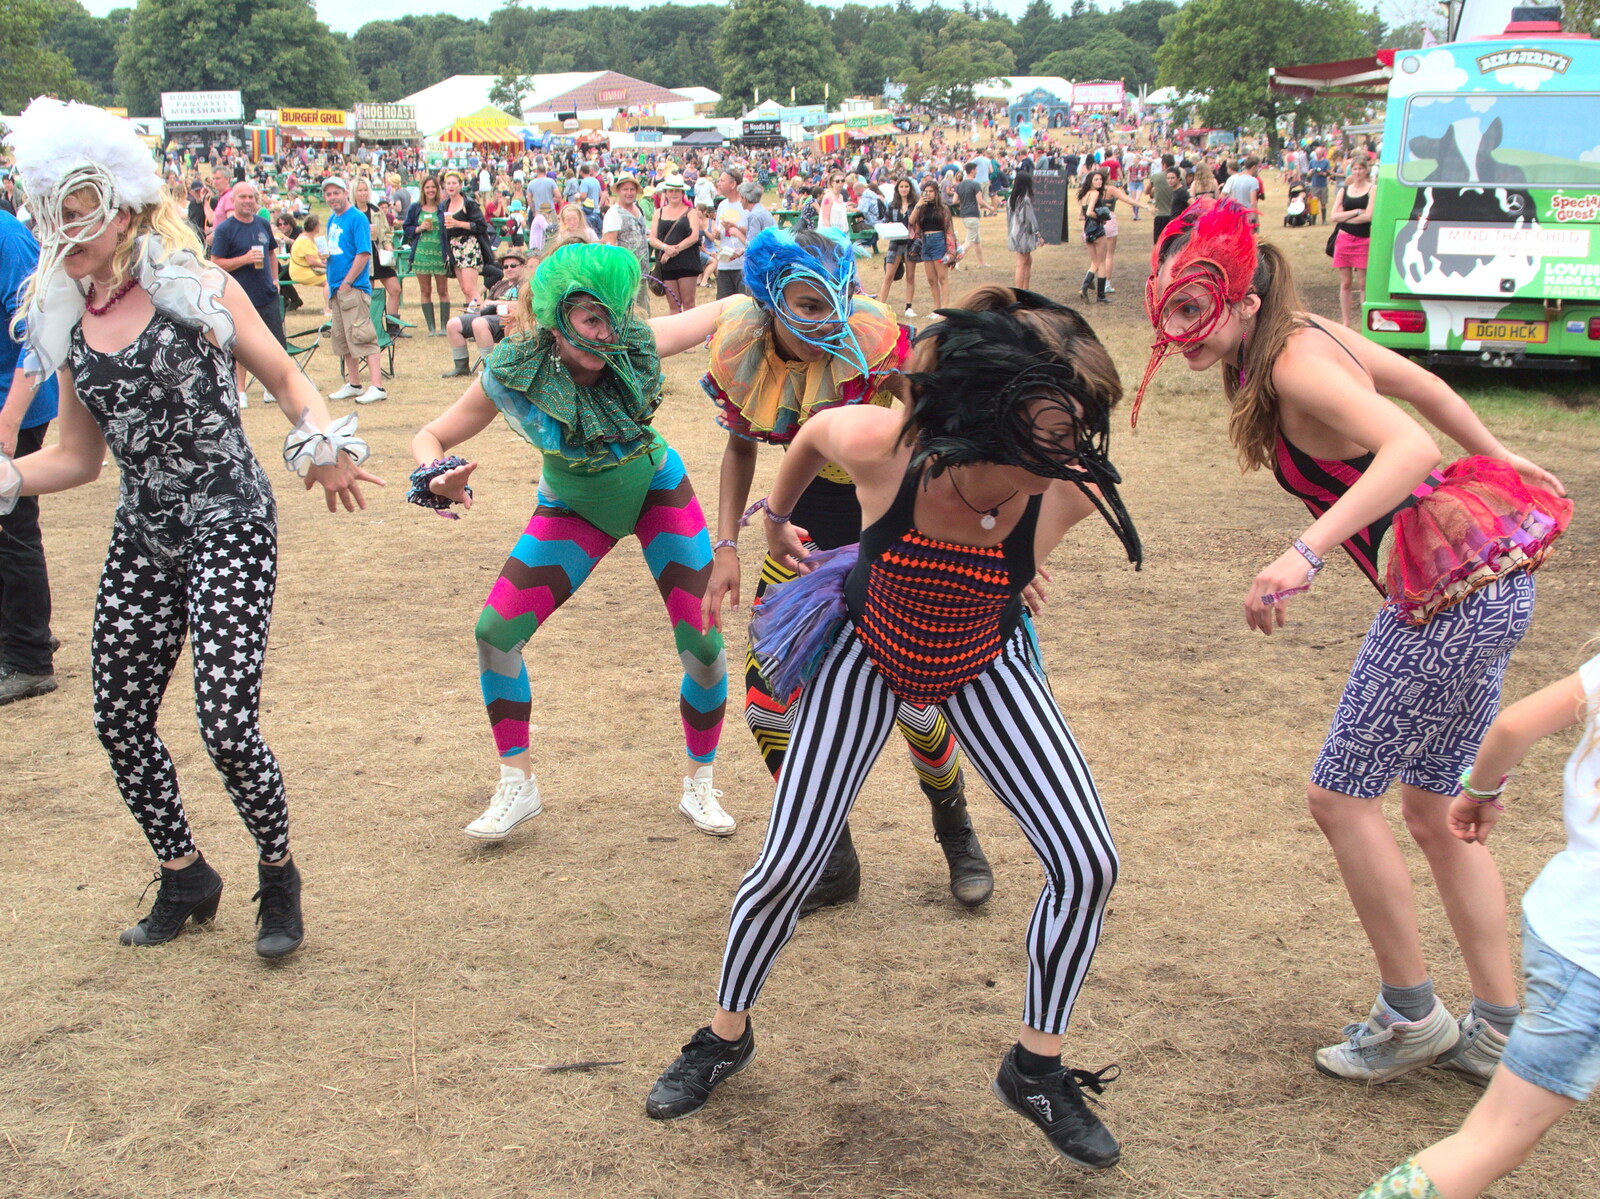 More funky dancing from Latitude Festival, Henham Park, Southwold, Suffolk - 17th July 2014